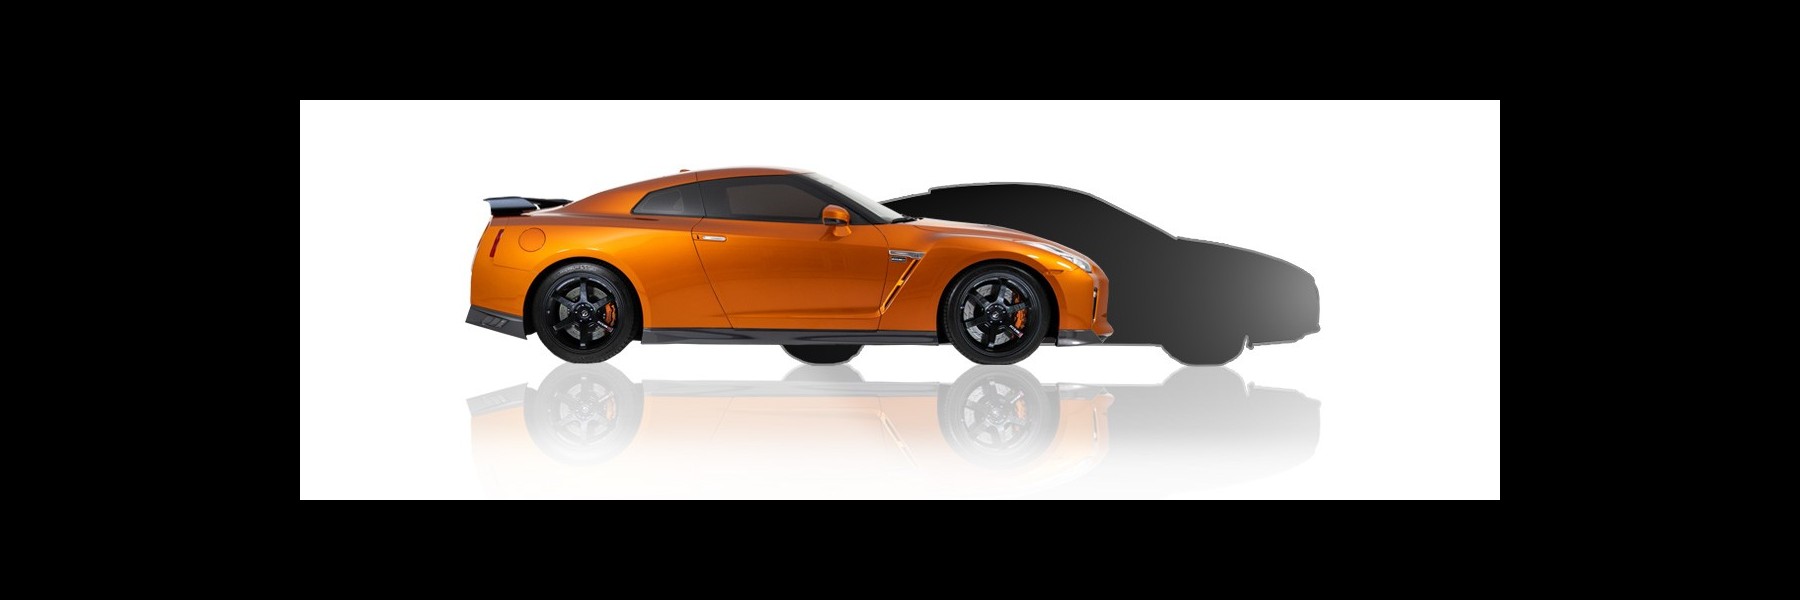 Combo Nissan GT-R + car of your choice